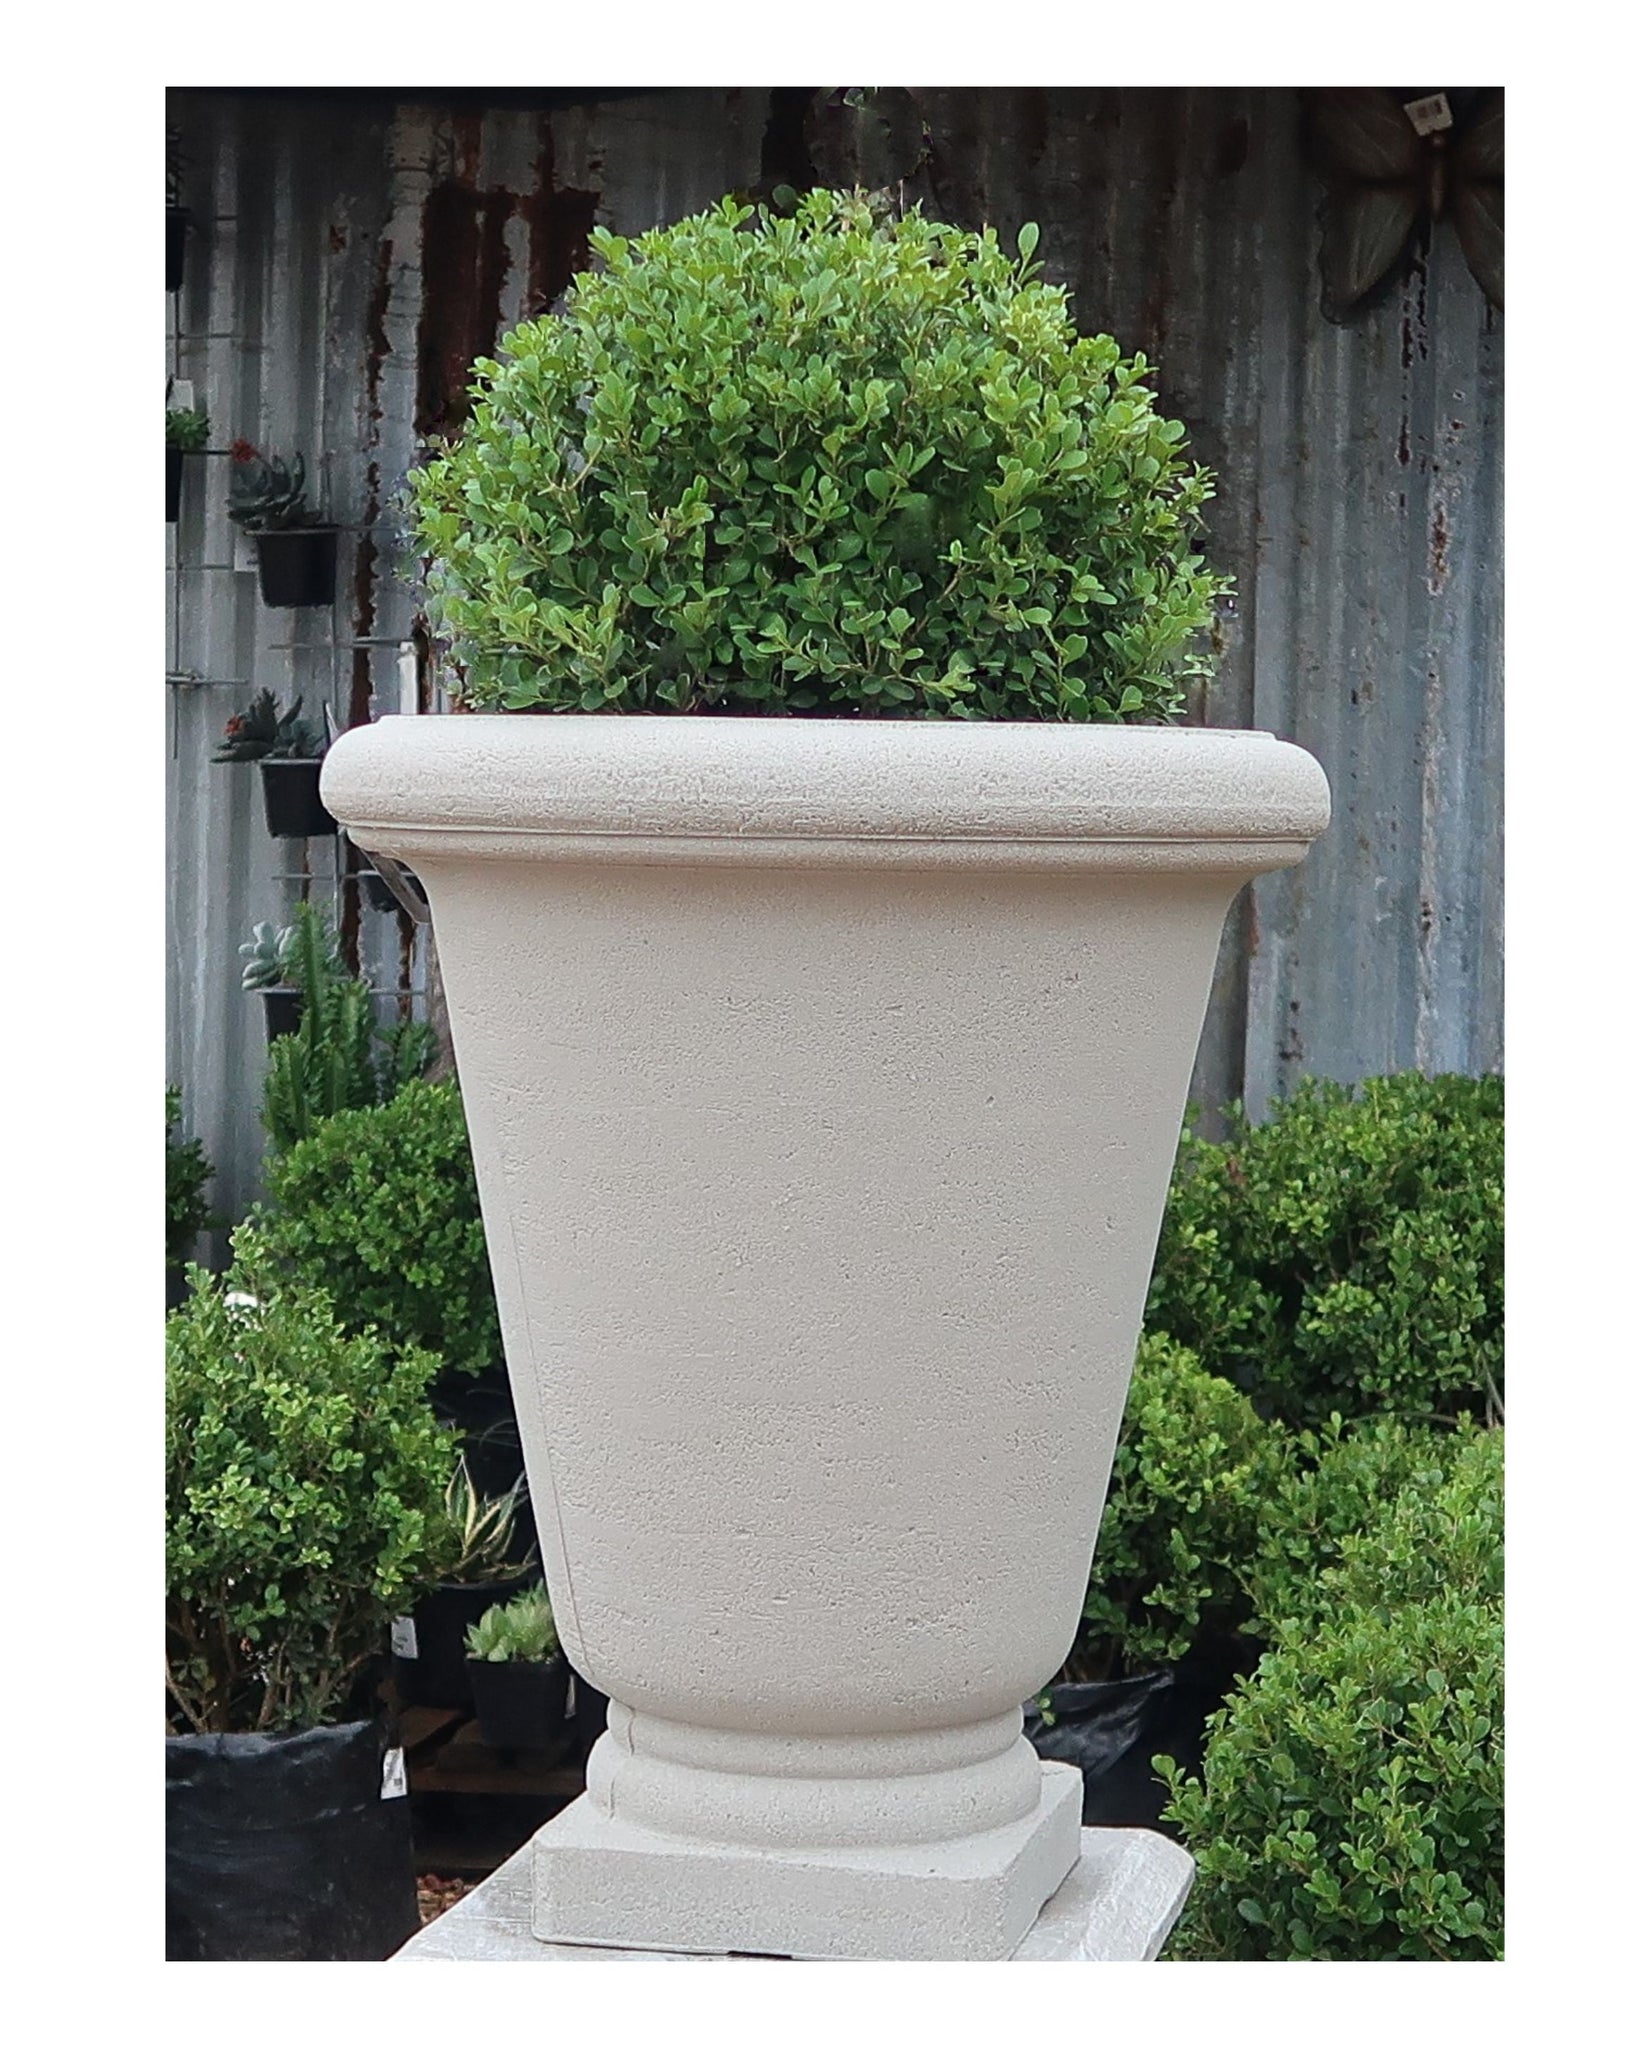 Bell Urn planter by Japi,  planted with a buxus ball raised up on a plinth. With a background  of foliage. Florastyle by Hingham.